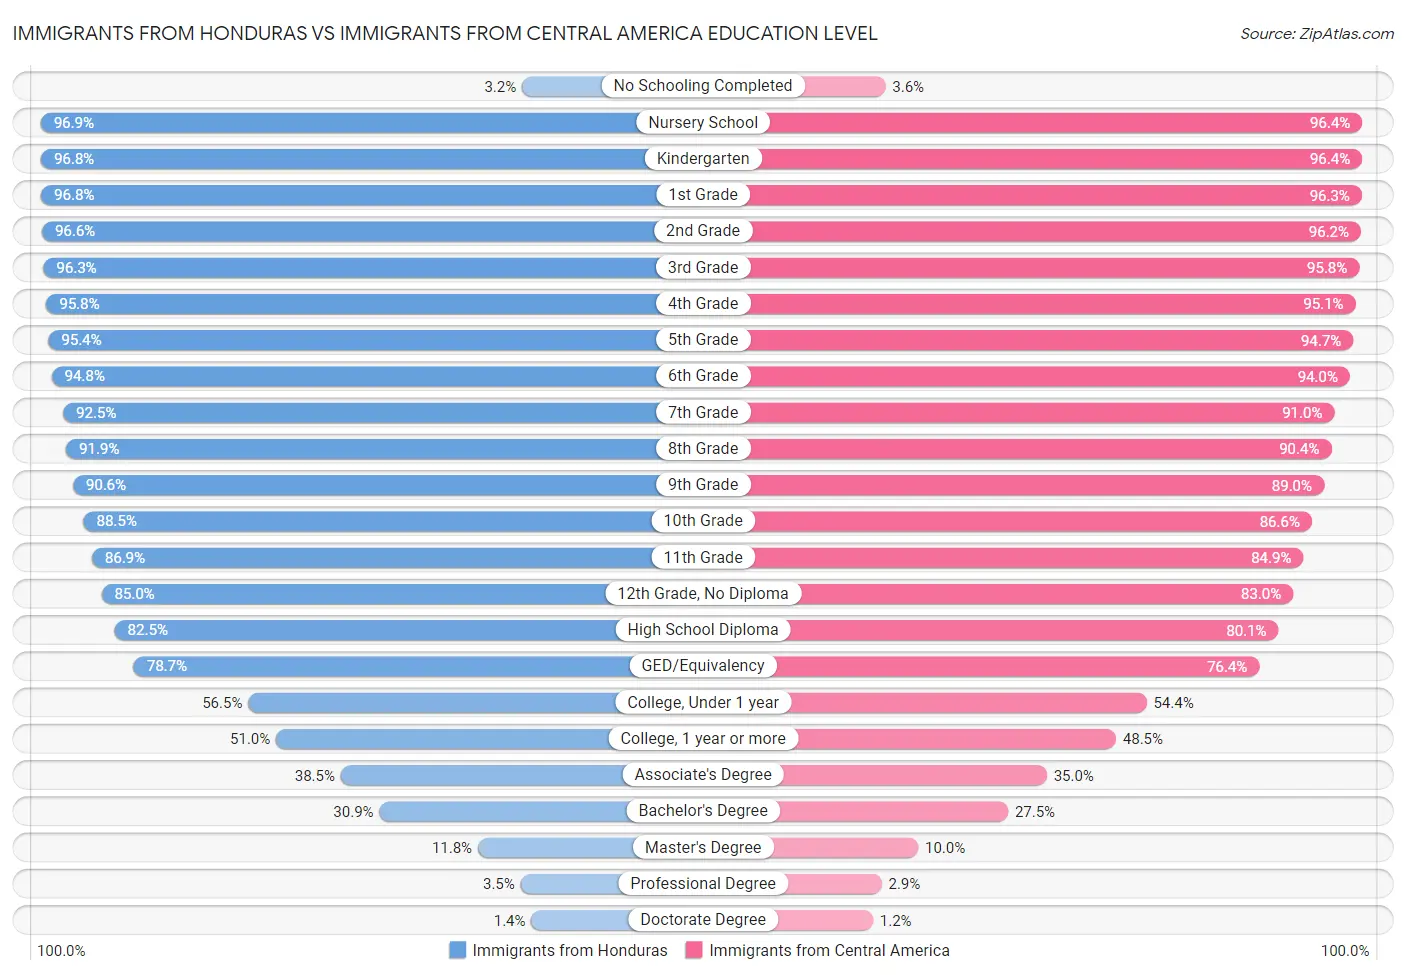 Immigrants from Honduras vs Immigrants from Central America Education Level